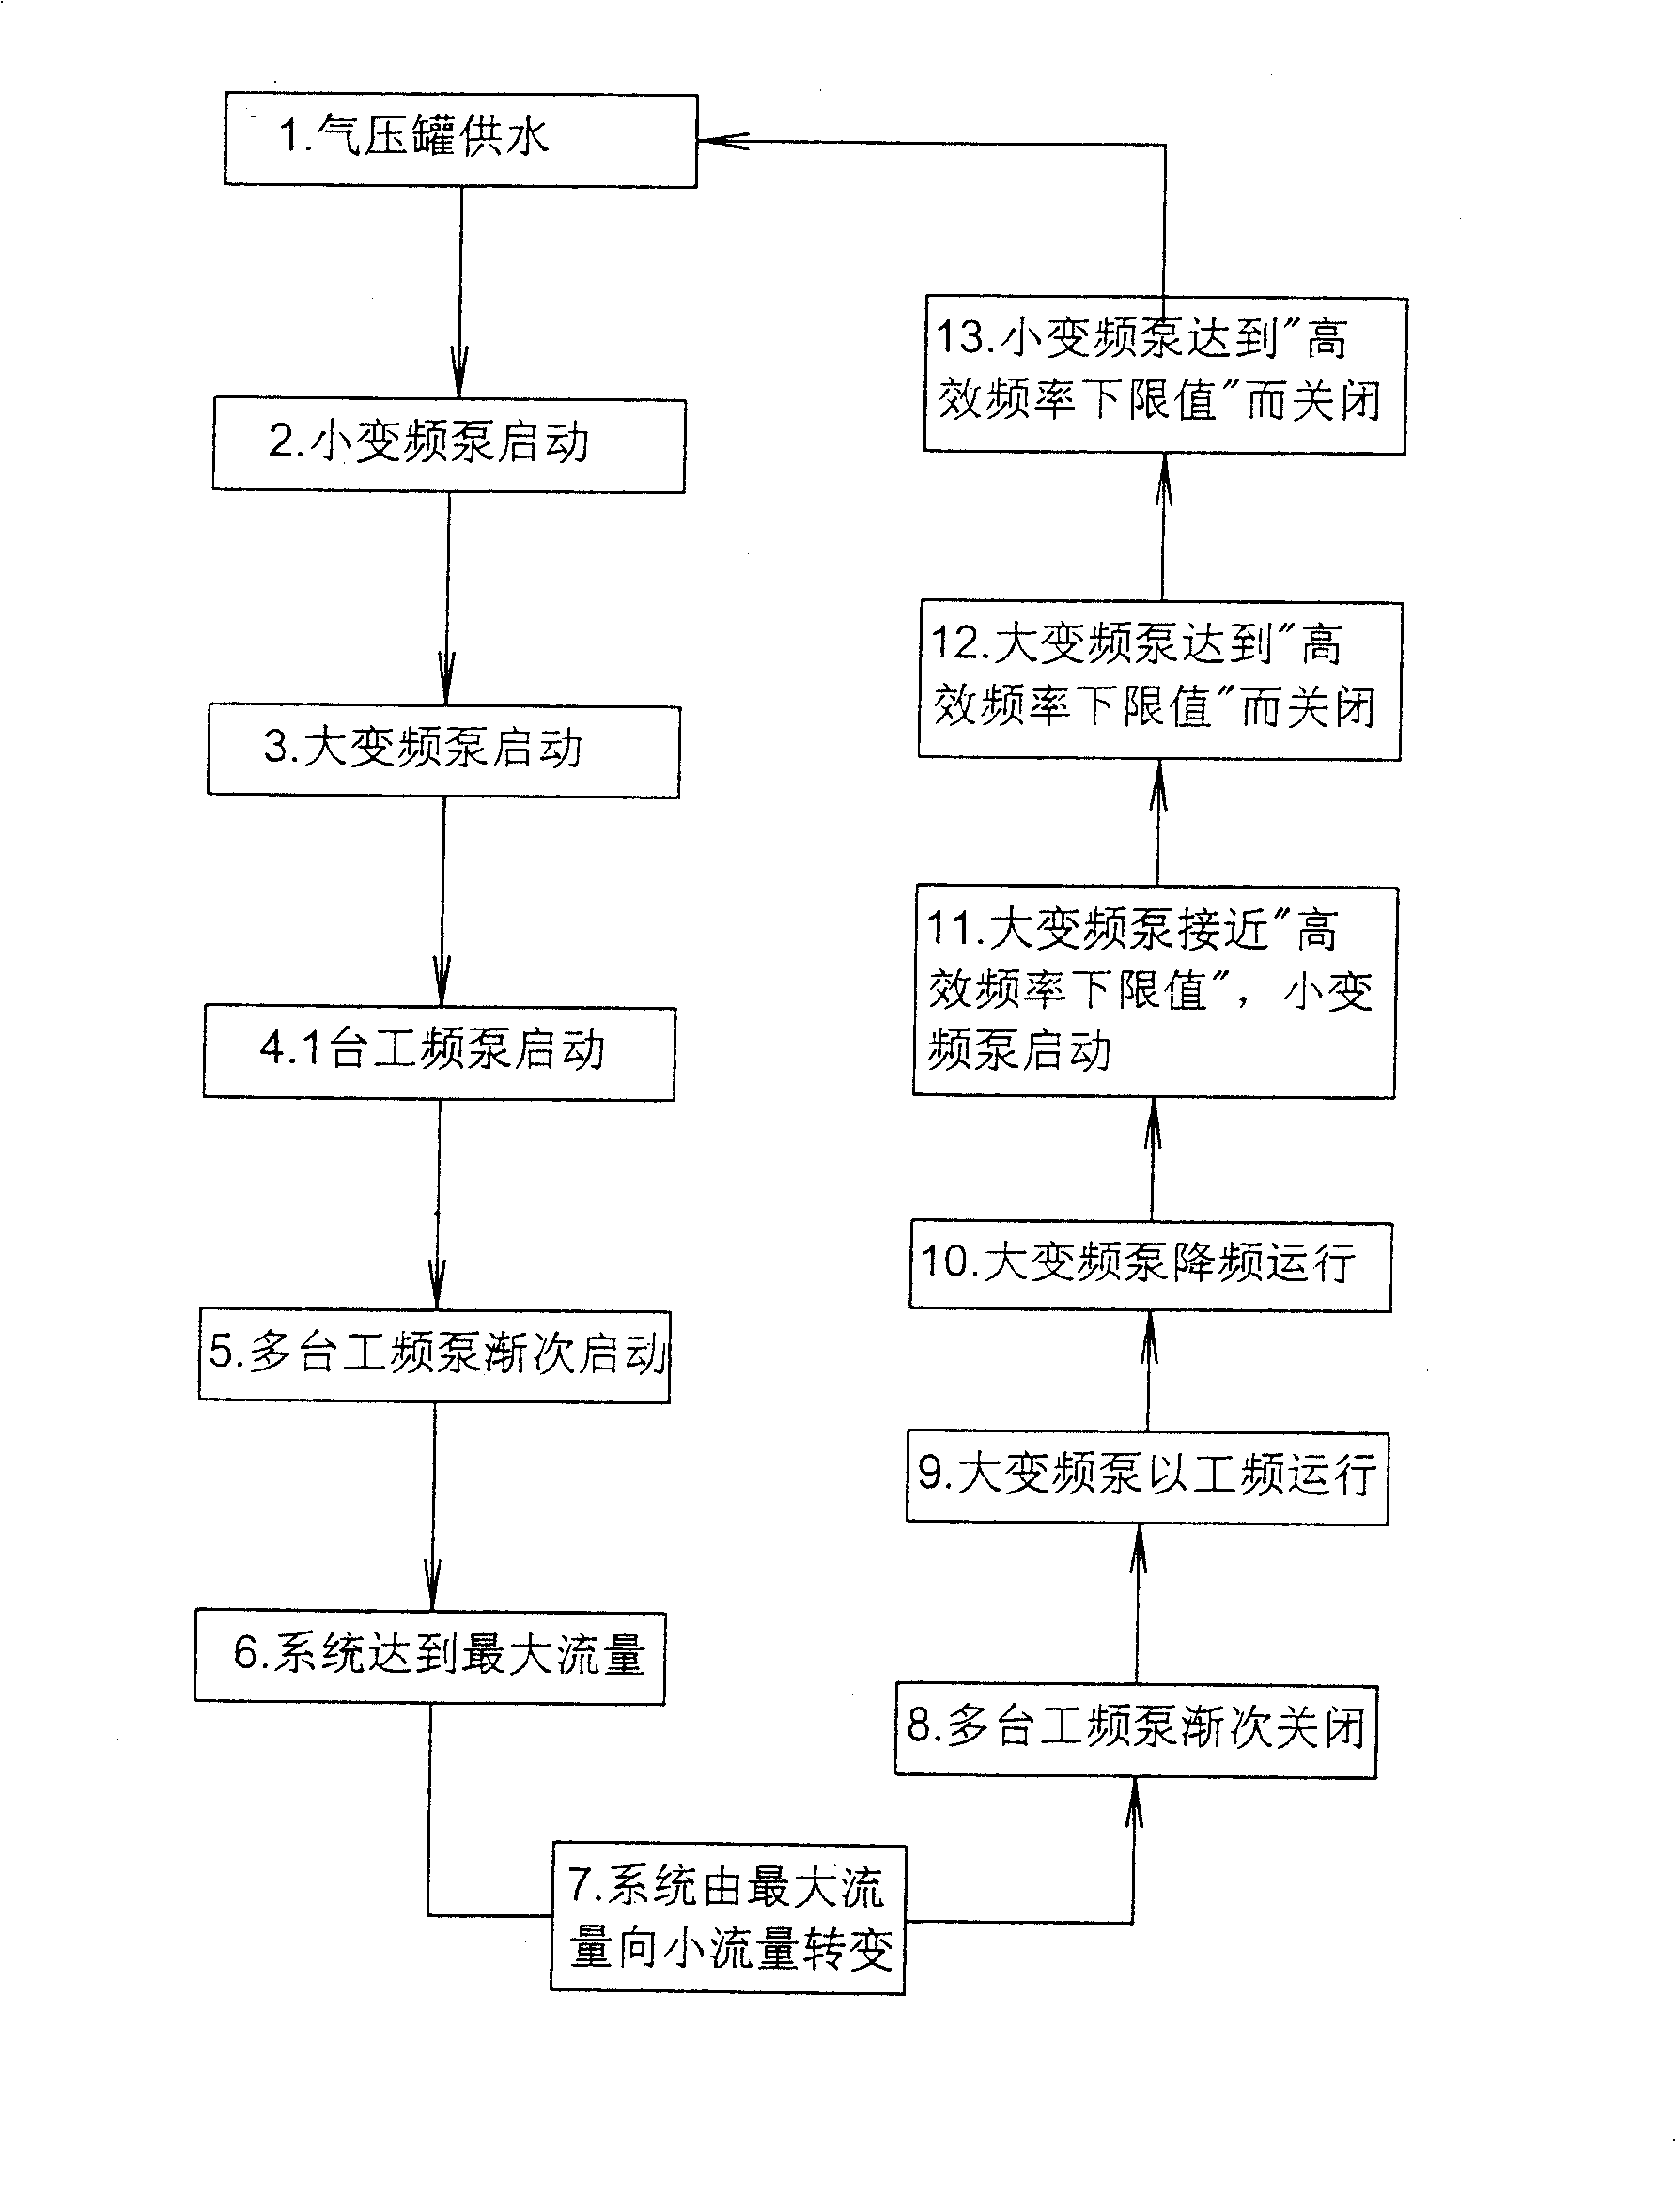 High-efficient frequency-variable and speed-adjusting water supplying method with total flow and supplying apparatus thereof